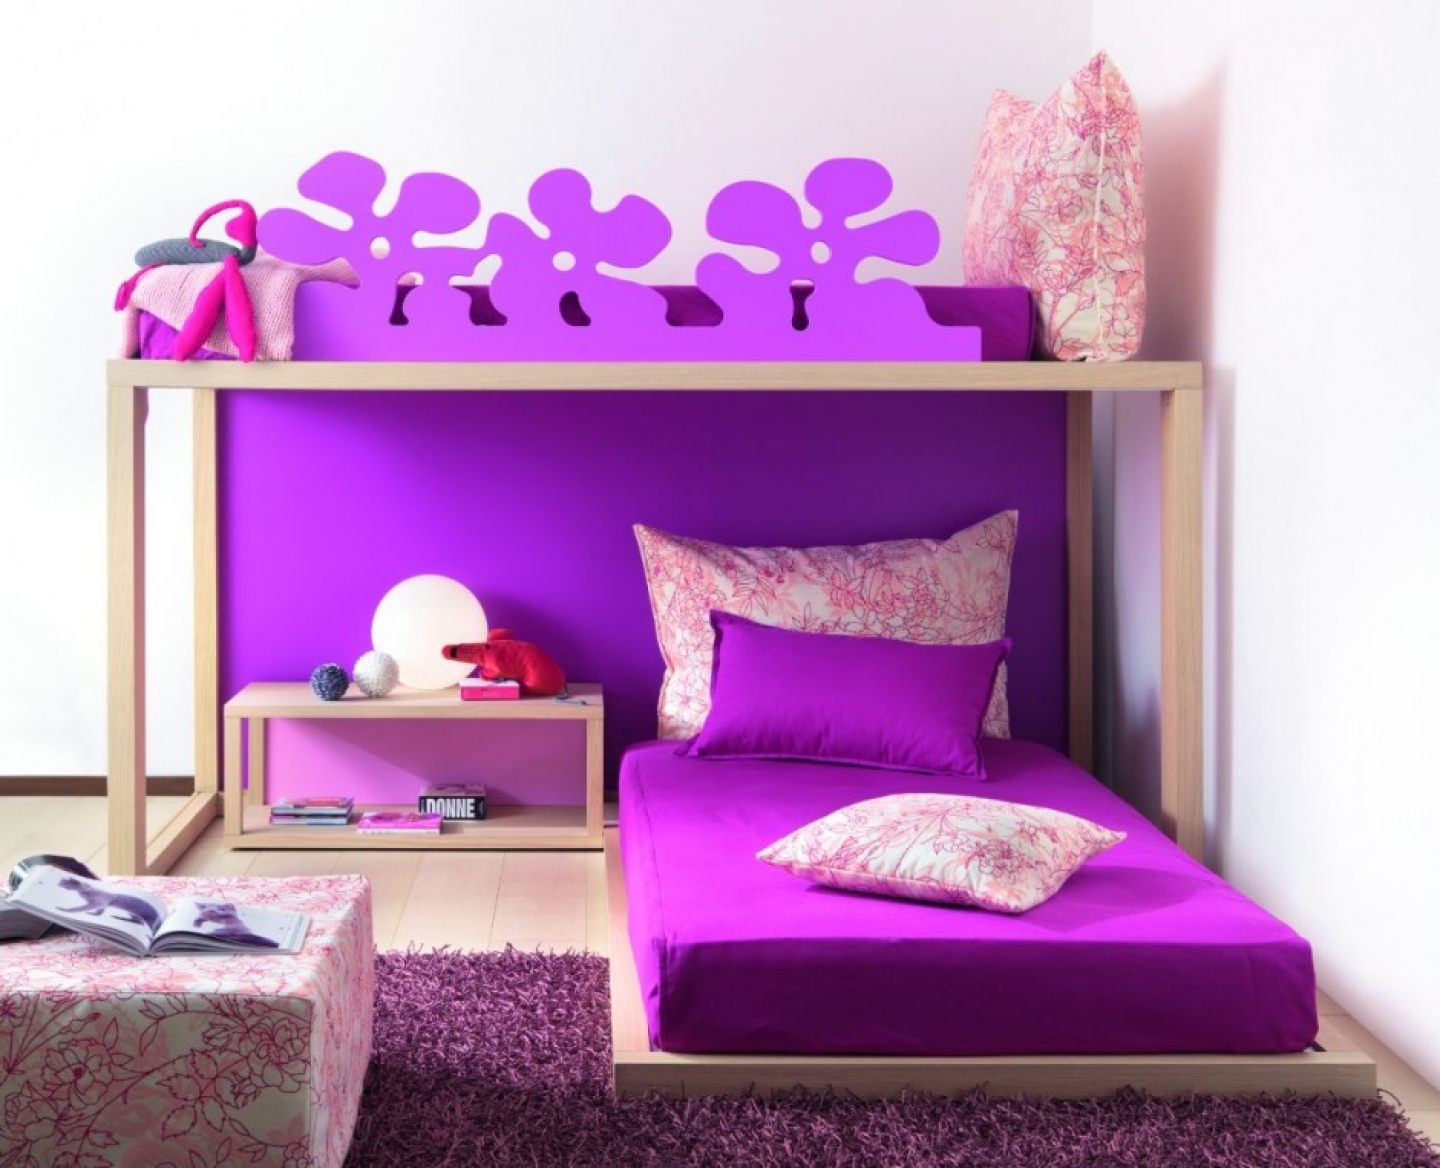 Contemporary Bedroom Bedroom Appealing Contemporary Bedroom Applying Girls Bedroom Furniture With Bunk Bed In Purple Themes Completed With Soft Rug And Table For Bedroom Decorations Bedroom Girls Bedroom Furniture: The Beach Condo Ideas